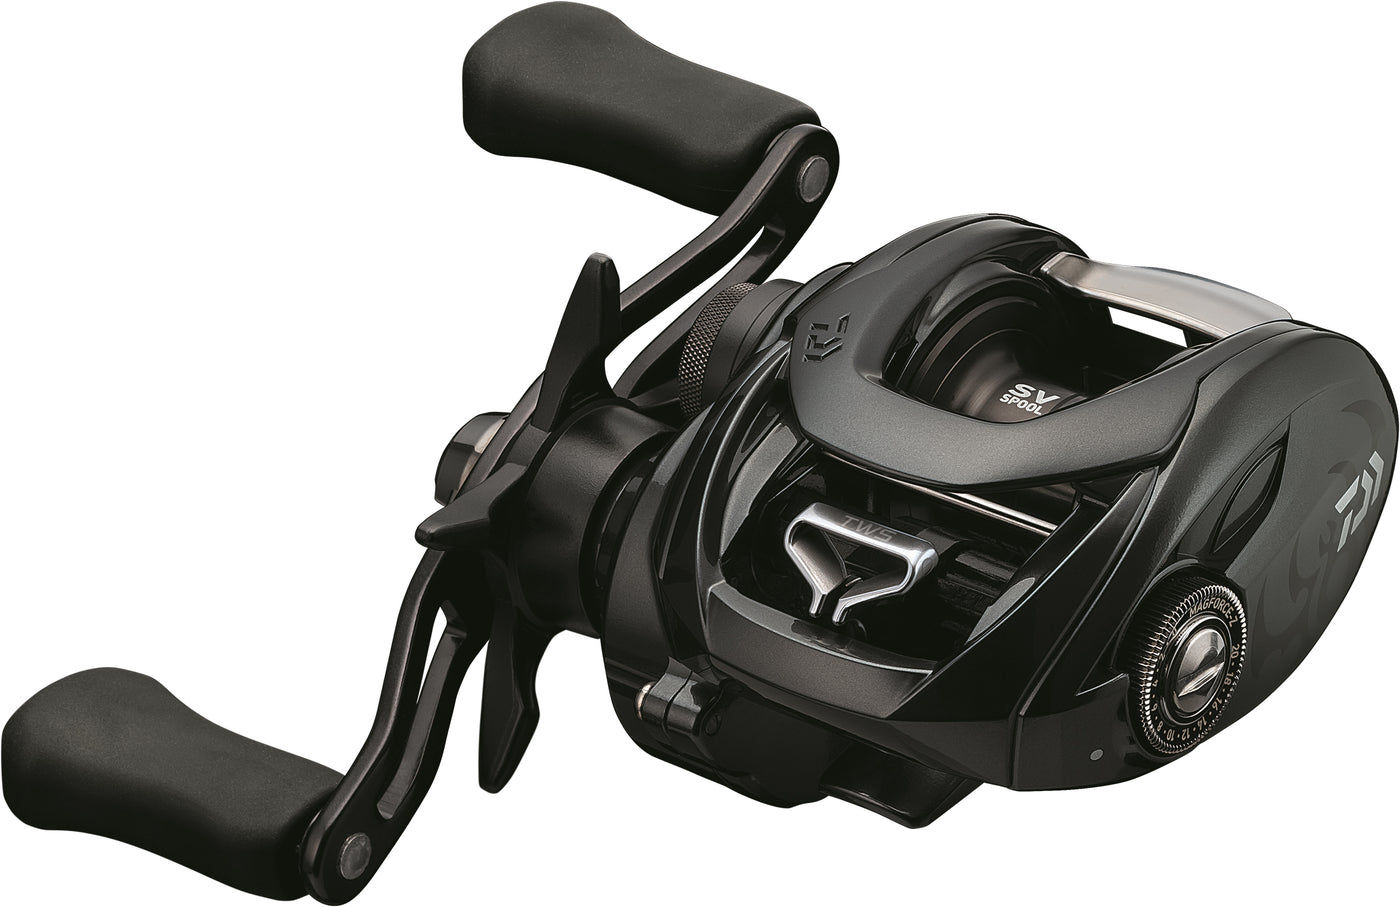 Have to say, the new Daiwa Tatula SV 70 is just amazing. Paired it